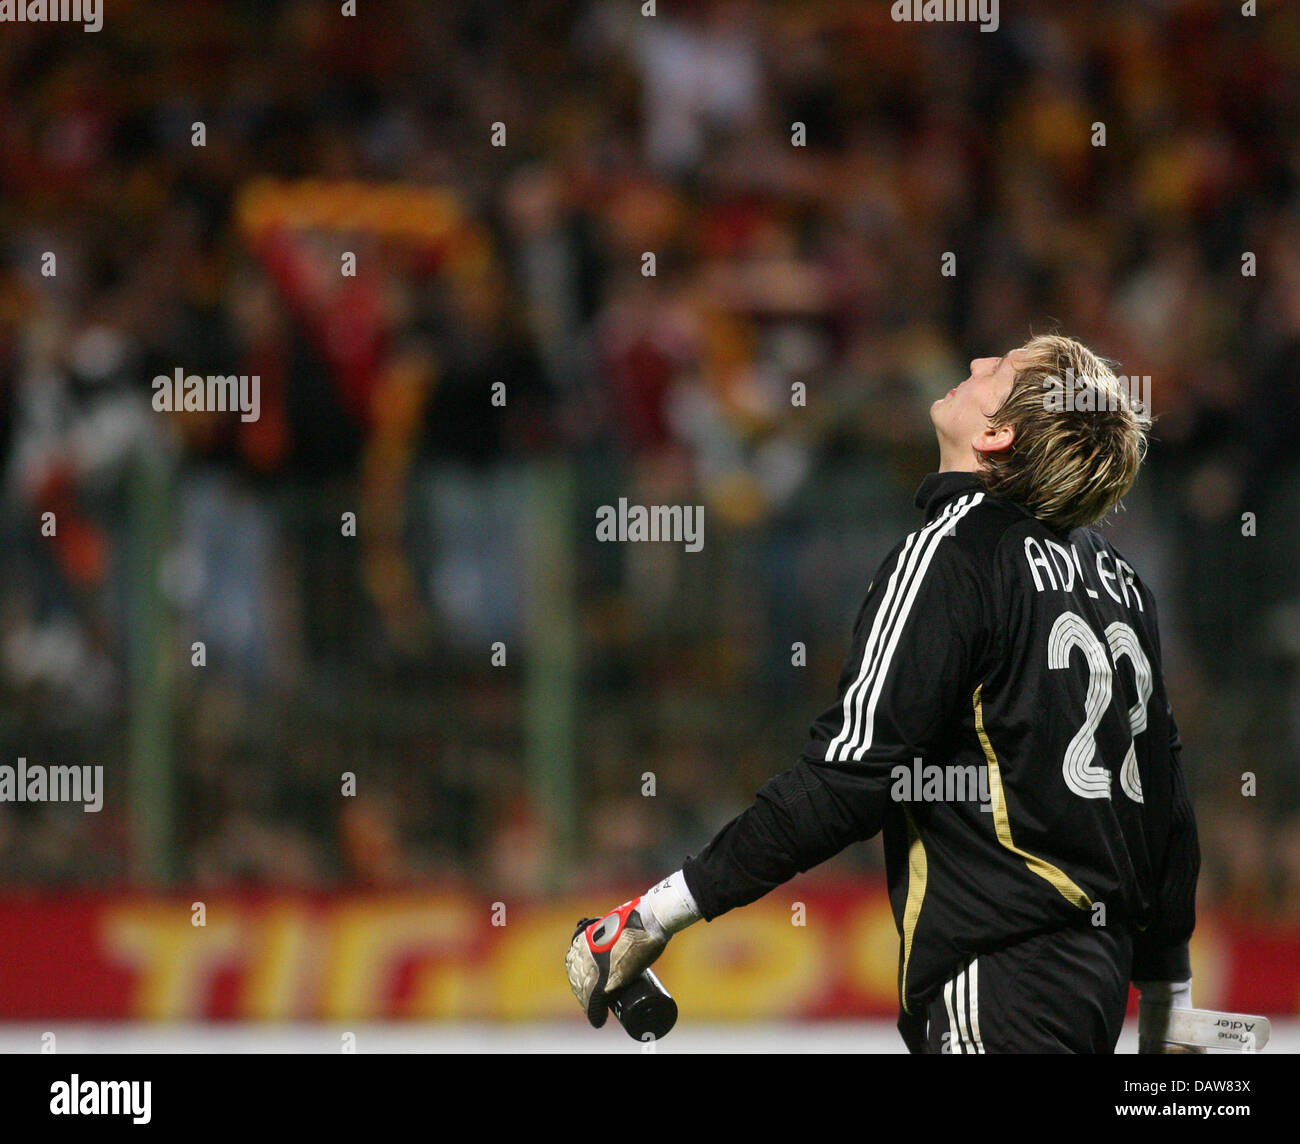 Leverkusen's goalkeeper Rene Adler gestures after the final whistle at the end of the UEFA Cup match RC Lens vs Bayer 04 Leverkusen at Félix-Bollaert Stadium in Lens, France, Thursday 08 March 2007. Haggui was subsequently expelled from the pitch while Lens scored the penalty shot. Leverkusen lost to Lens by 1-2. Photo: Felix Heyder Stock Photo